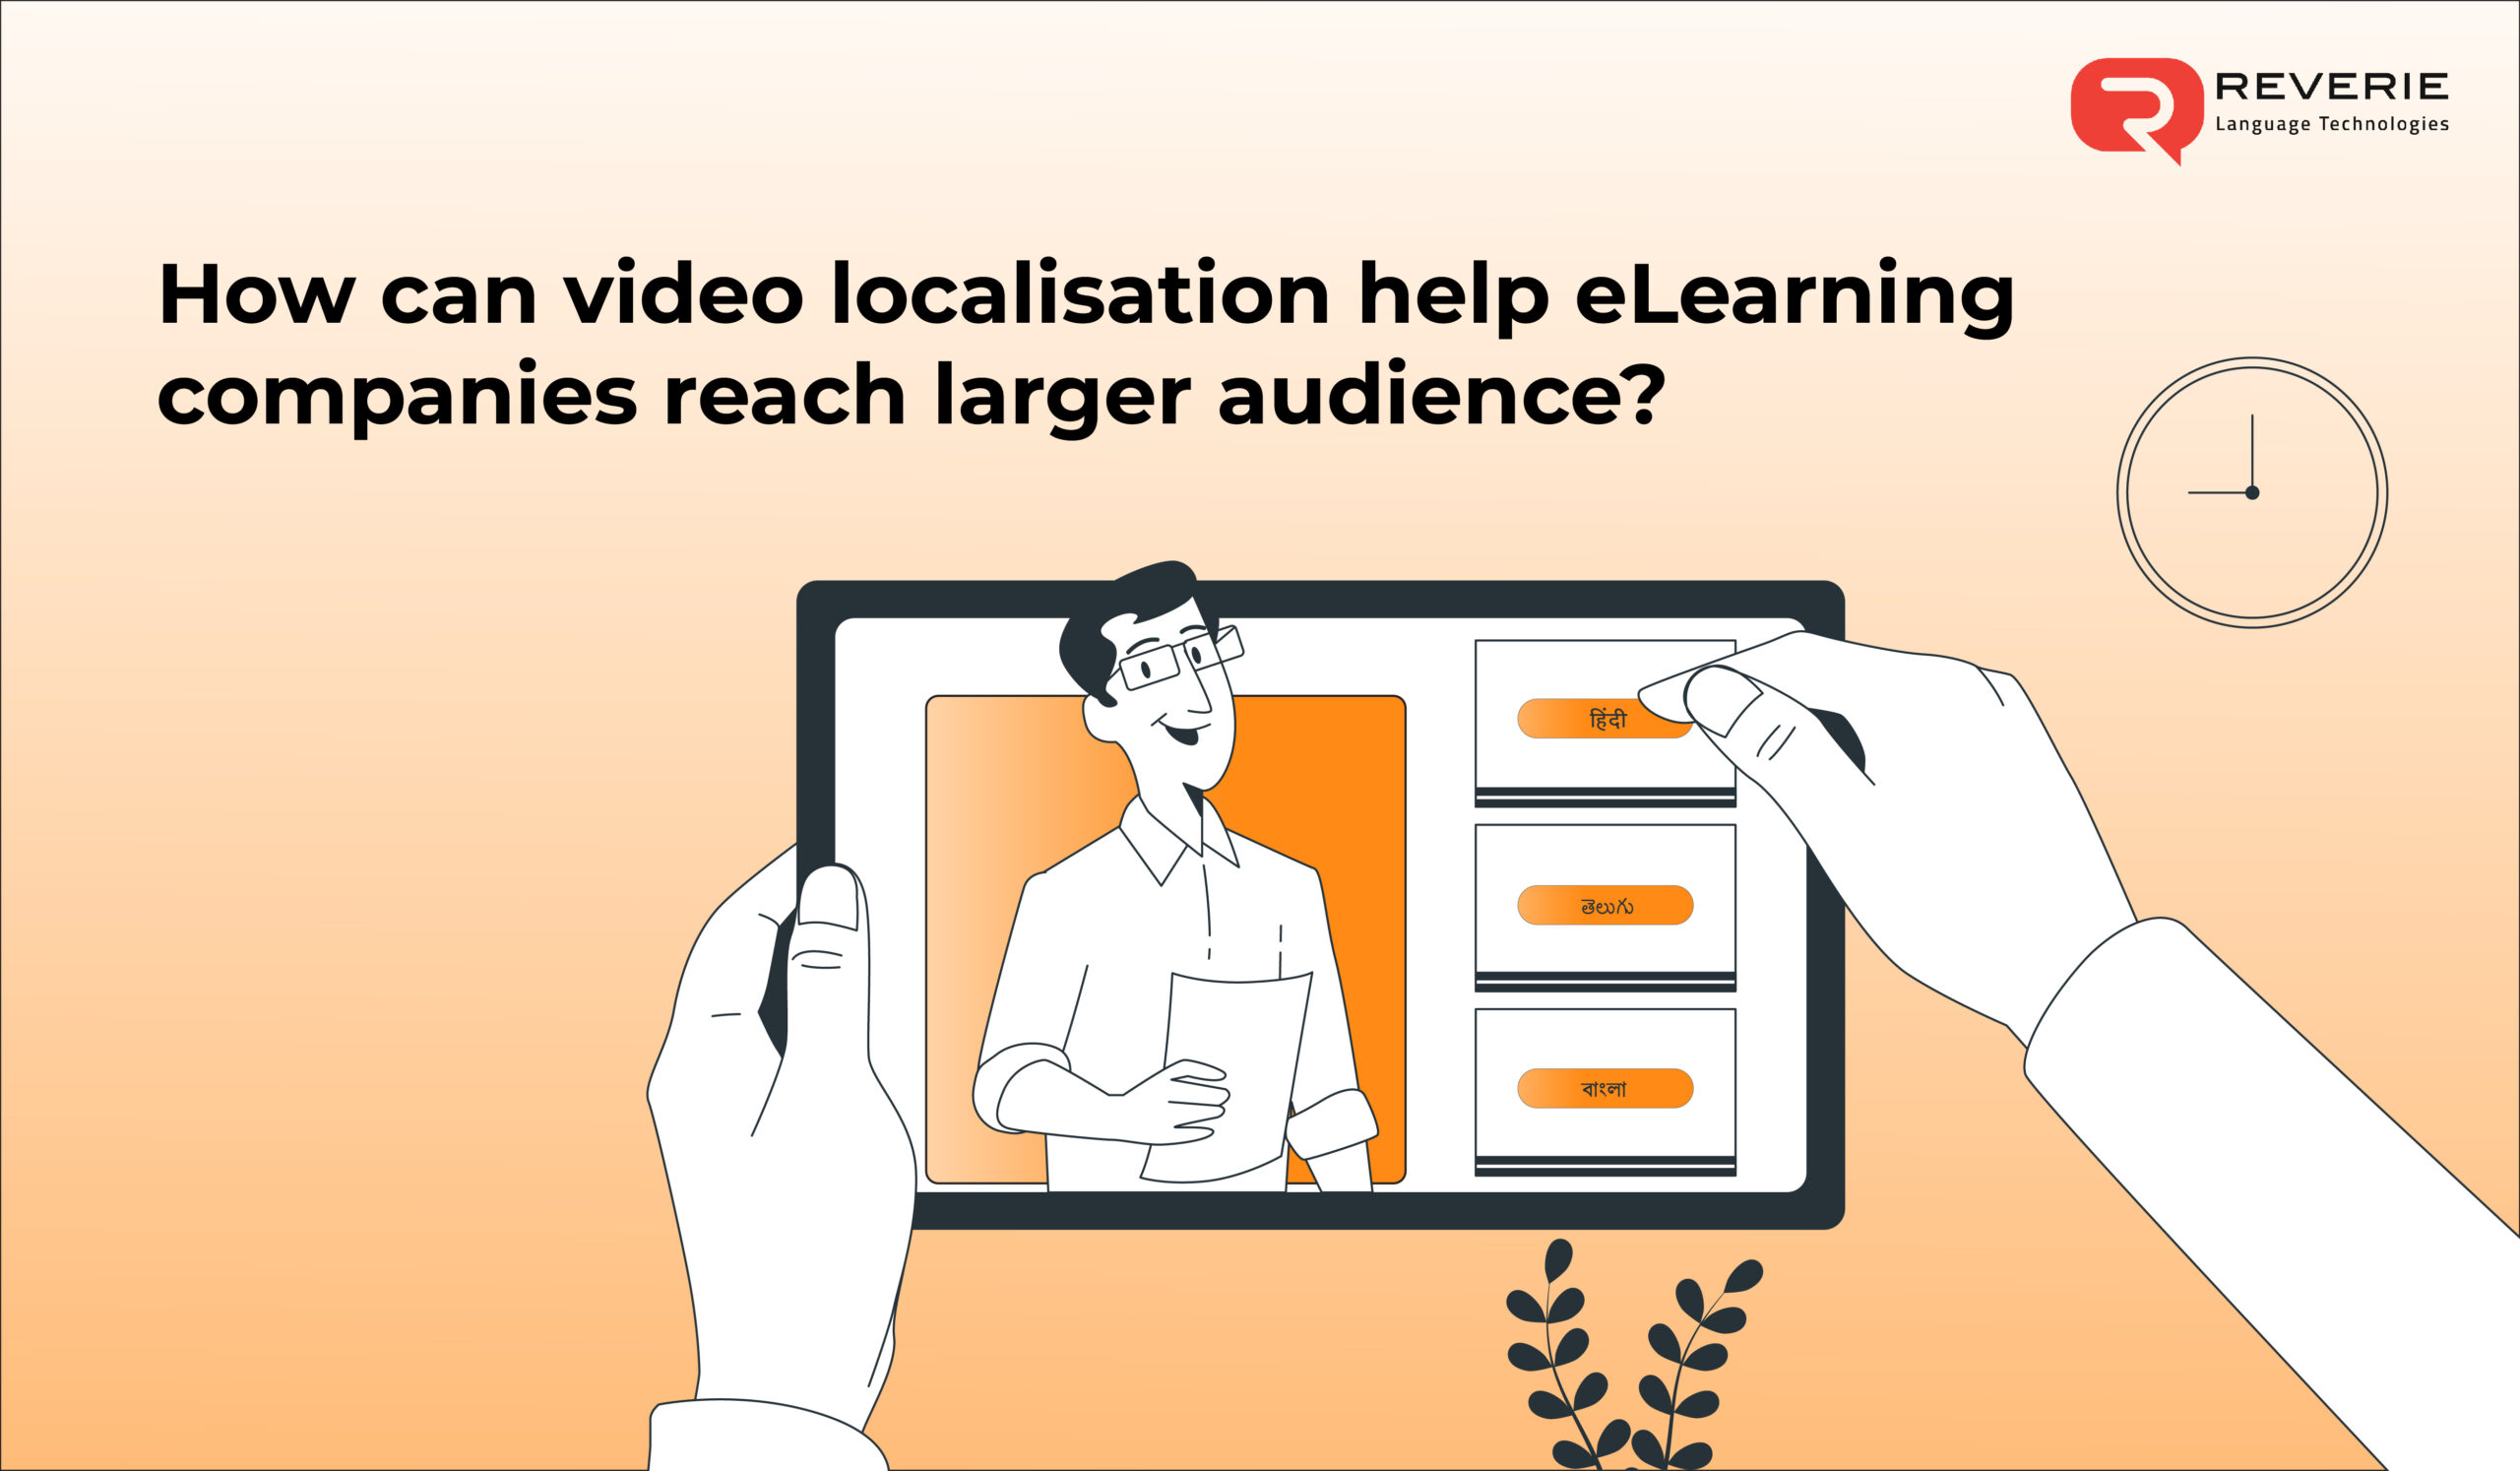 How can video localisation help ELearning companies